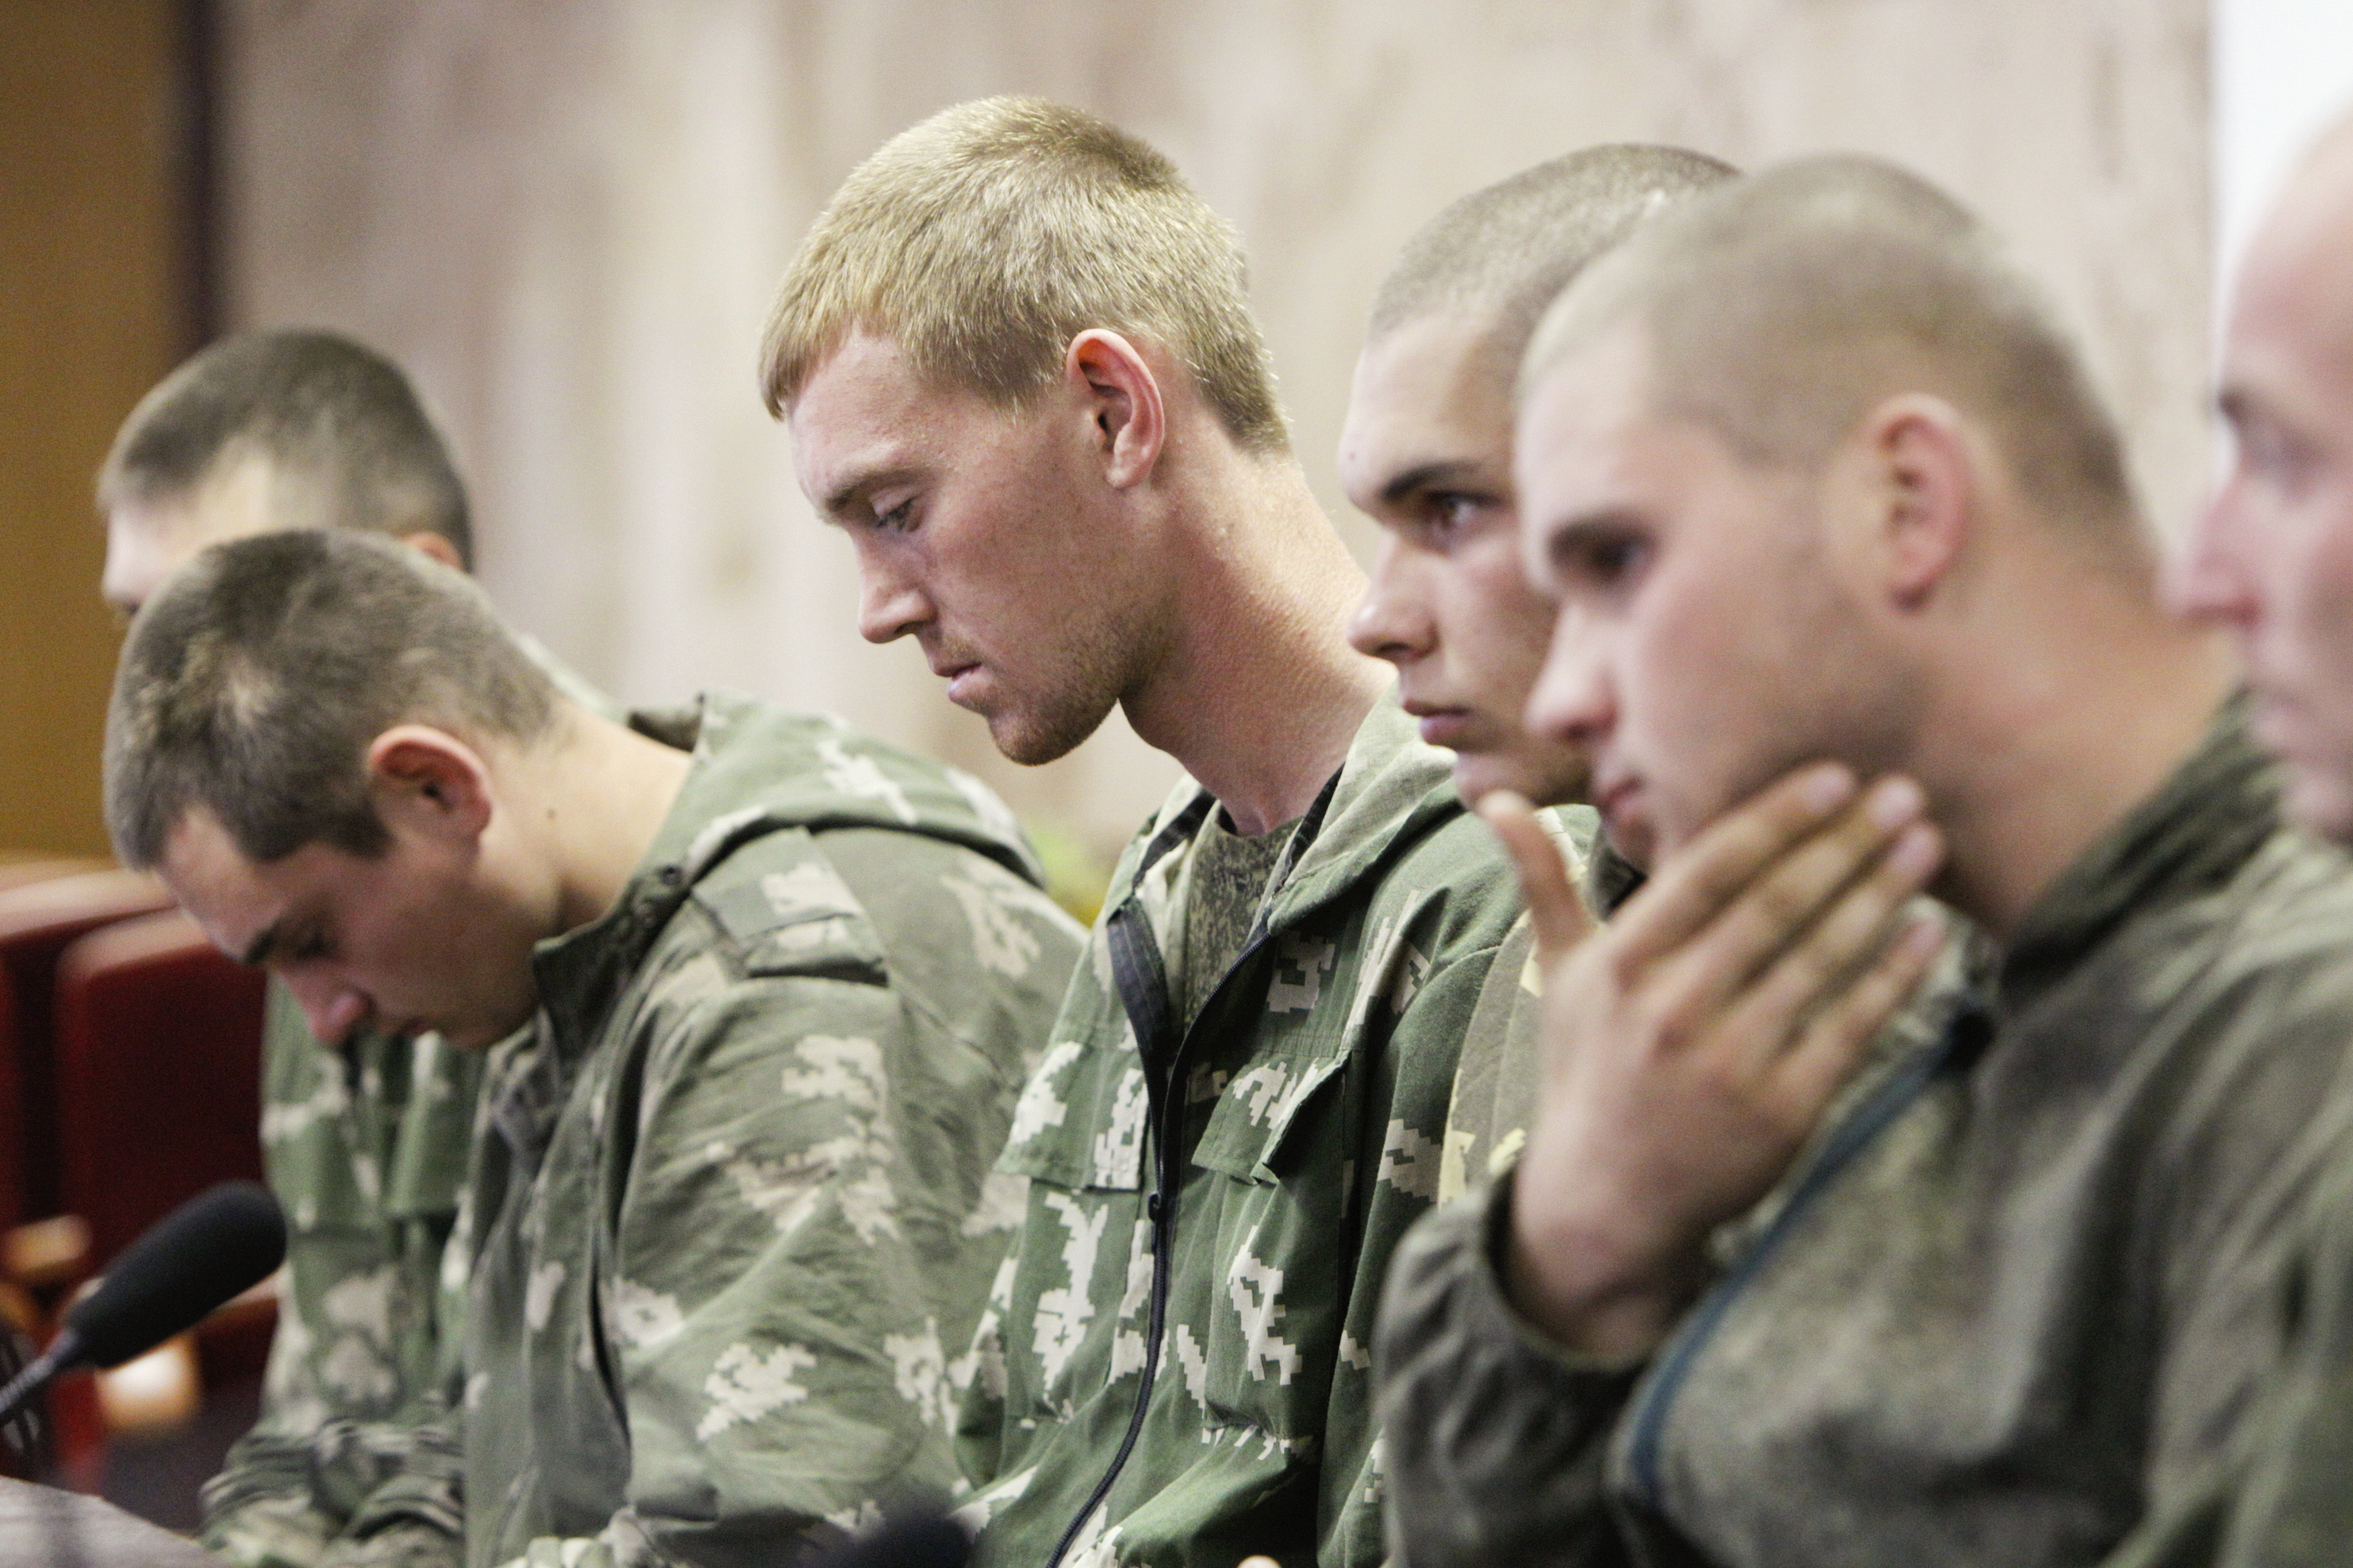 A group of Russian servicemen, who are detained by Ukrainian authorities, attend a news conference in Kiev